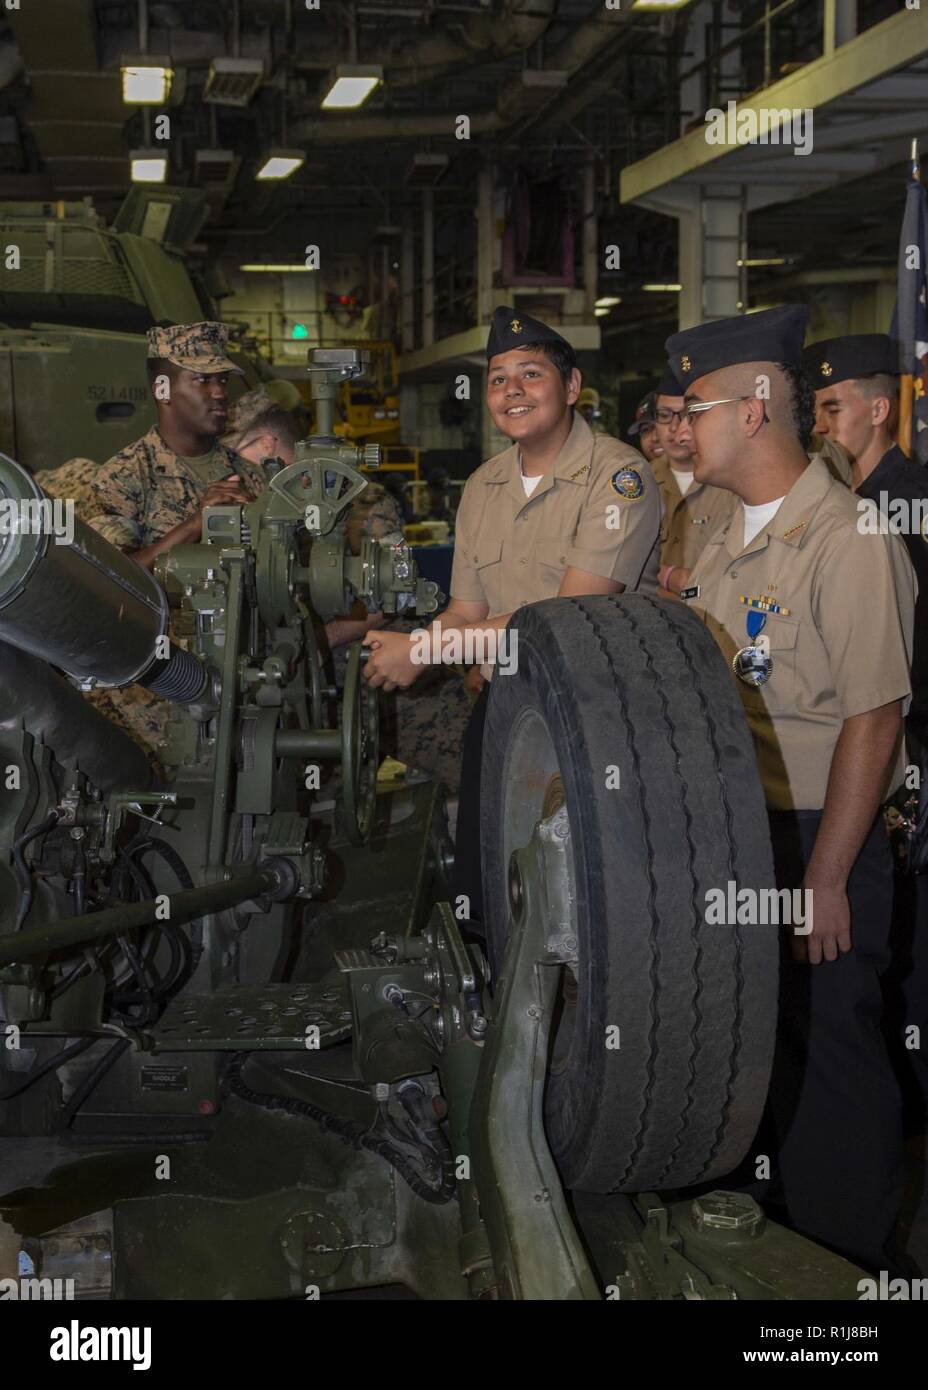 SAN FRANCISCO (Oct. 8, 2018) U.S. Navy Junior Reserve Officer Training Corps (JROTC) students from Everett Alvarez High School interact with an M-111 Alpha 2 Howitzer during a tour of the amphibious assault ship USS Bonhomme Richard (LHD 6) as part of San Francisco Fleet Week 2018. San Francisco Fleet Week is an opportunity for the American public to meet their Navy, Marine Corps and Coast Guard teams and experience America’s sea services. During fleet week, service members participate in various community service events, showcase capabilities and equipment to the community, and enjoy the hosp Stock Photo